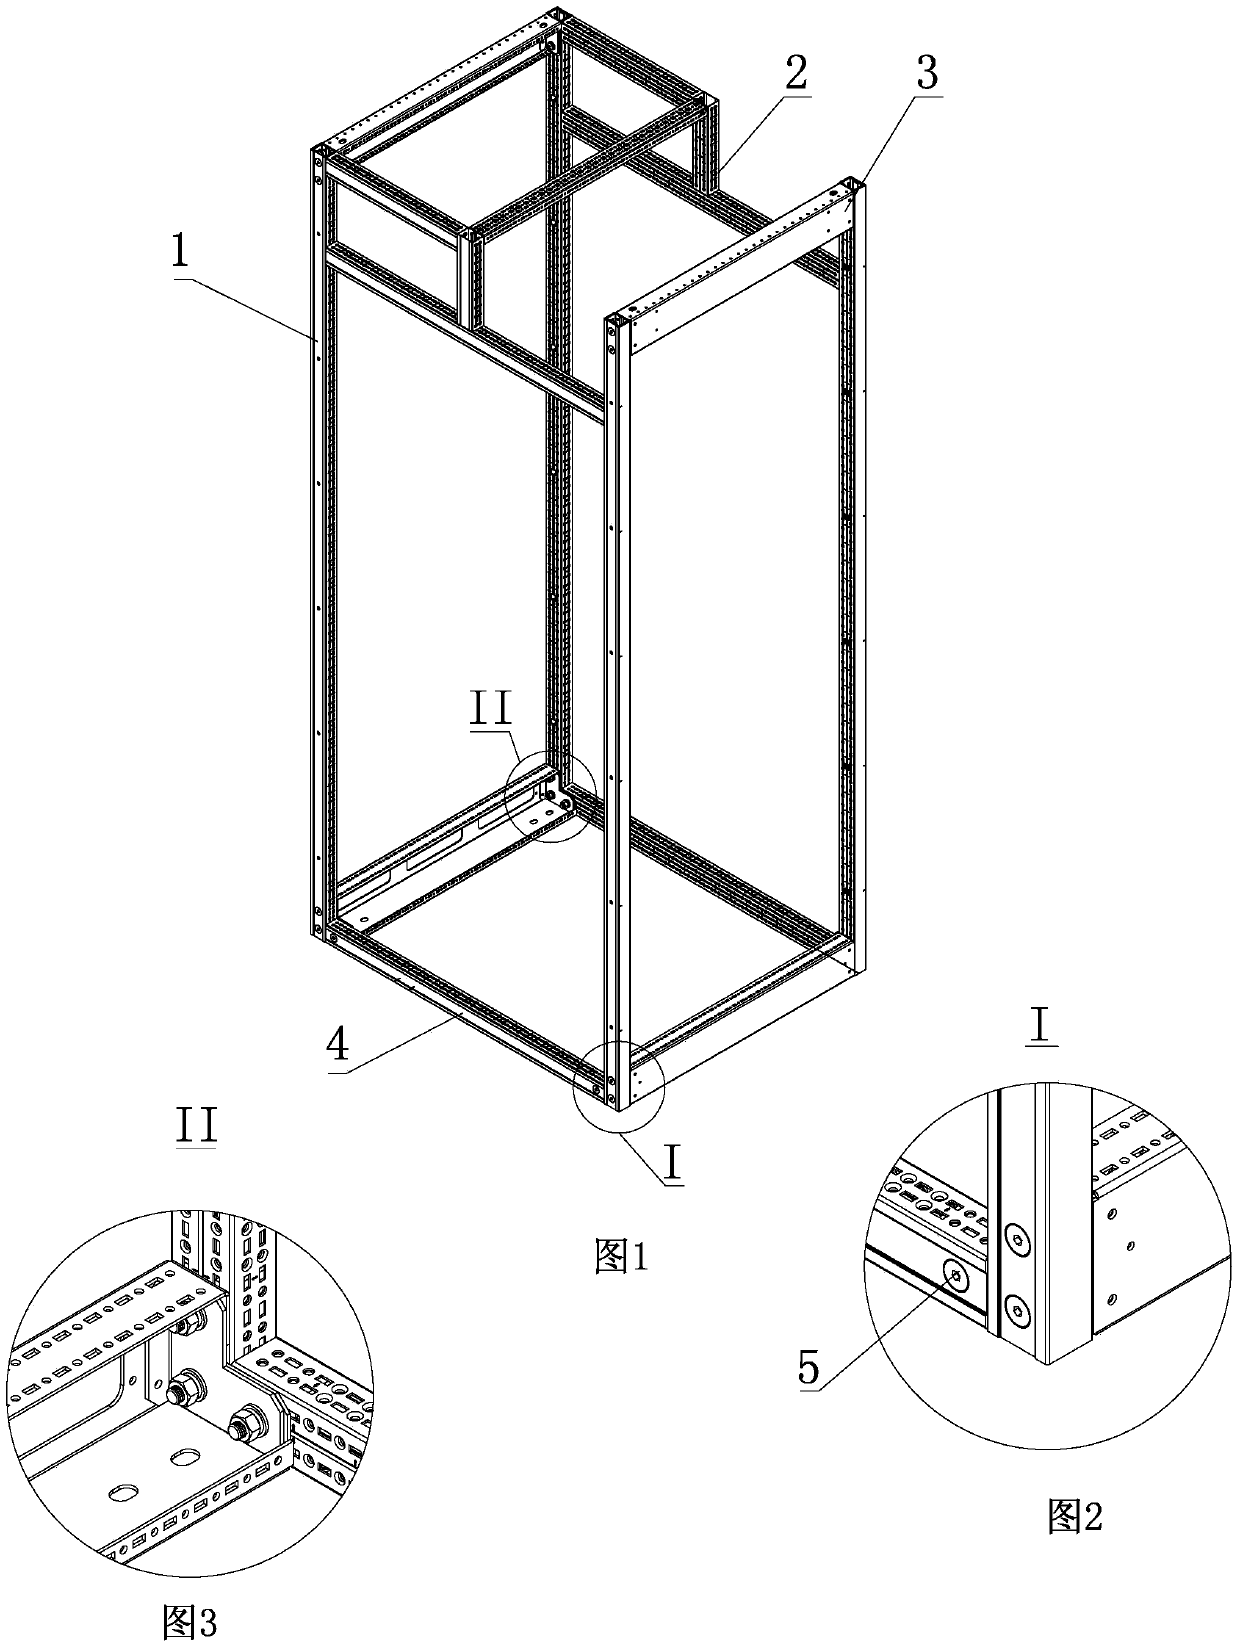 Steel frame of a switch cabinet